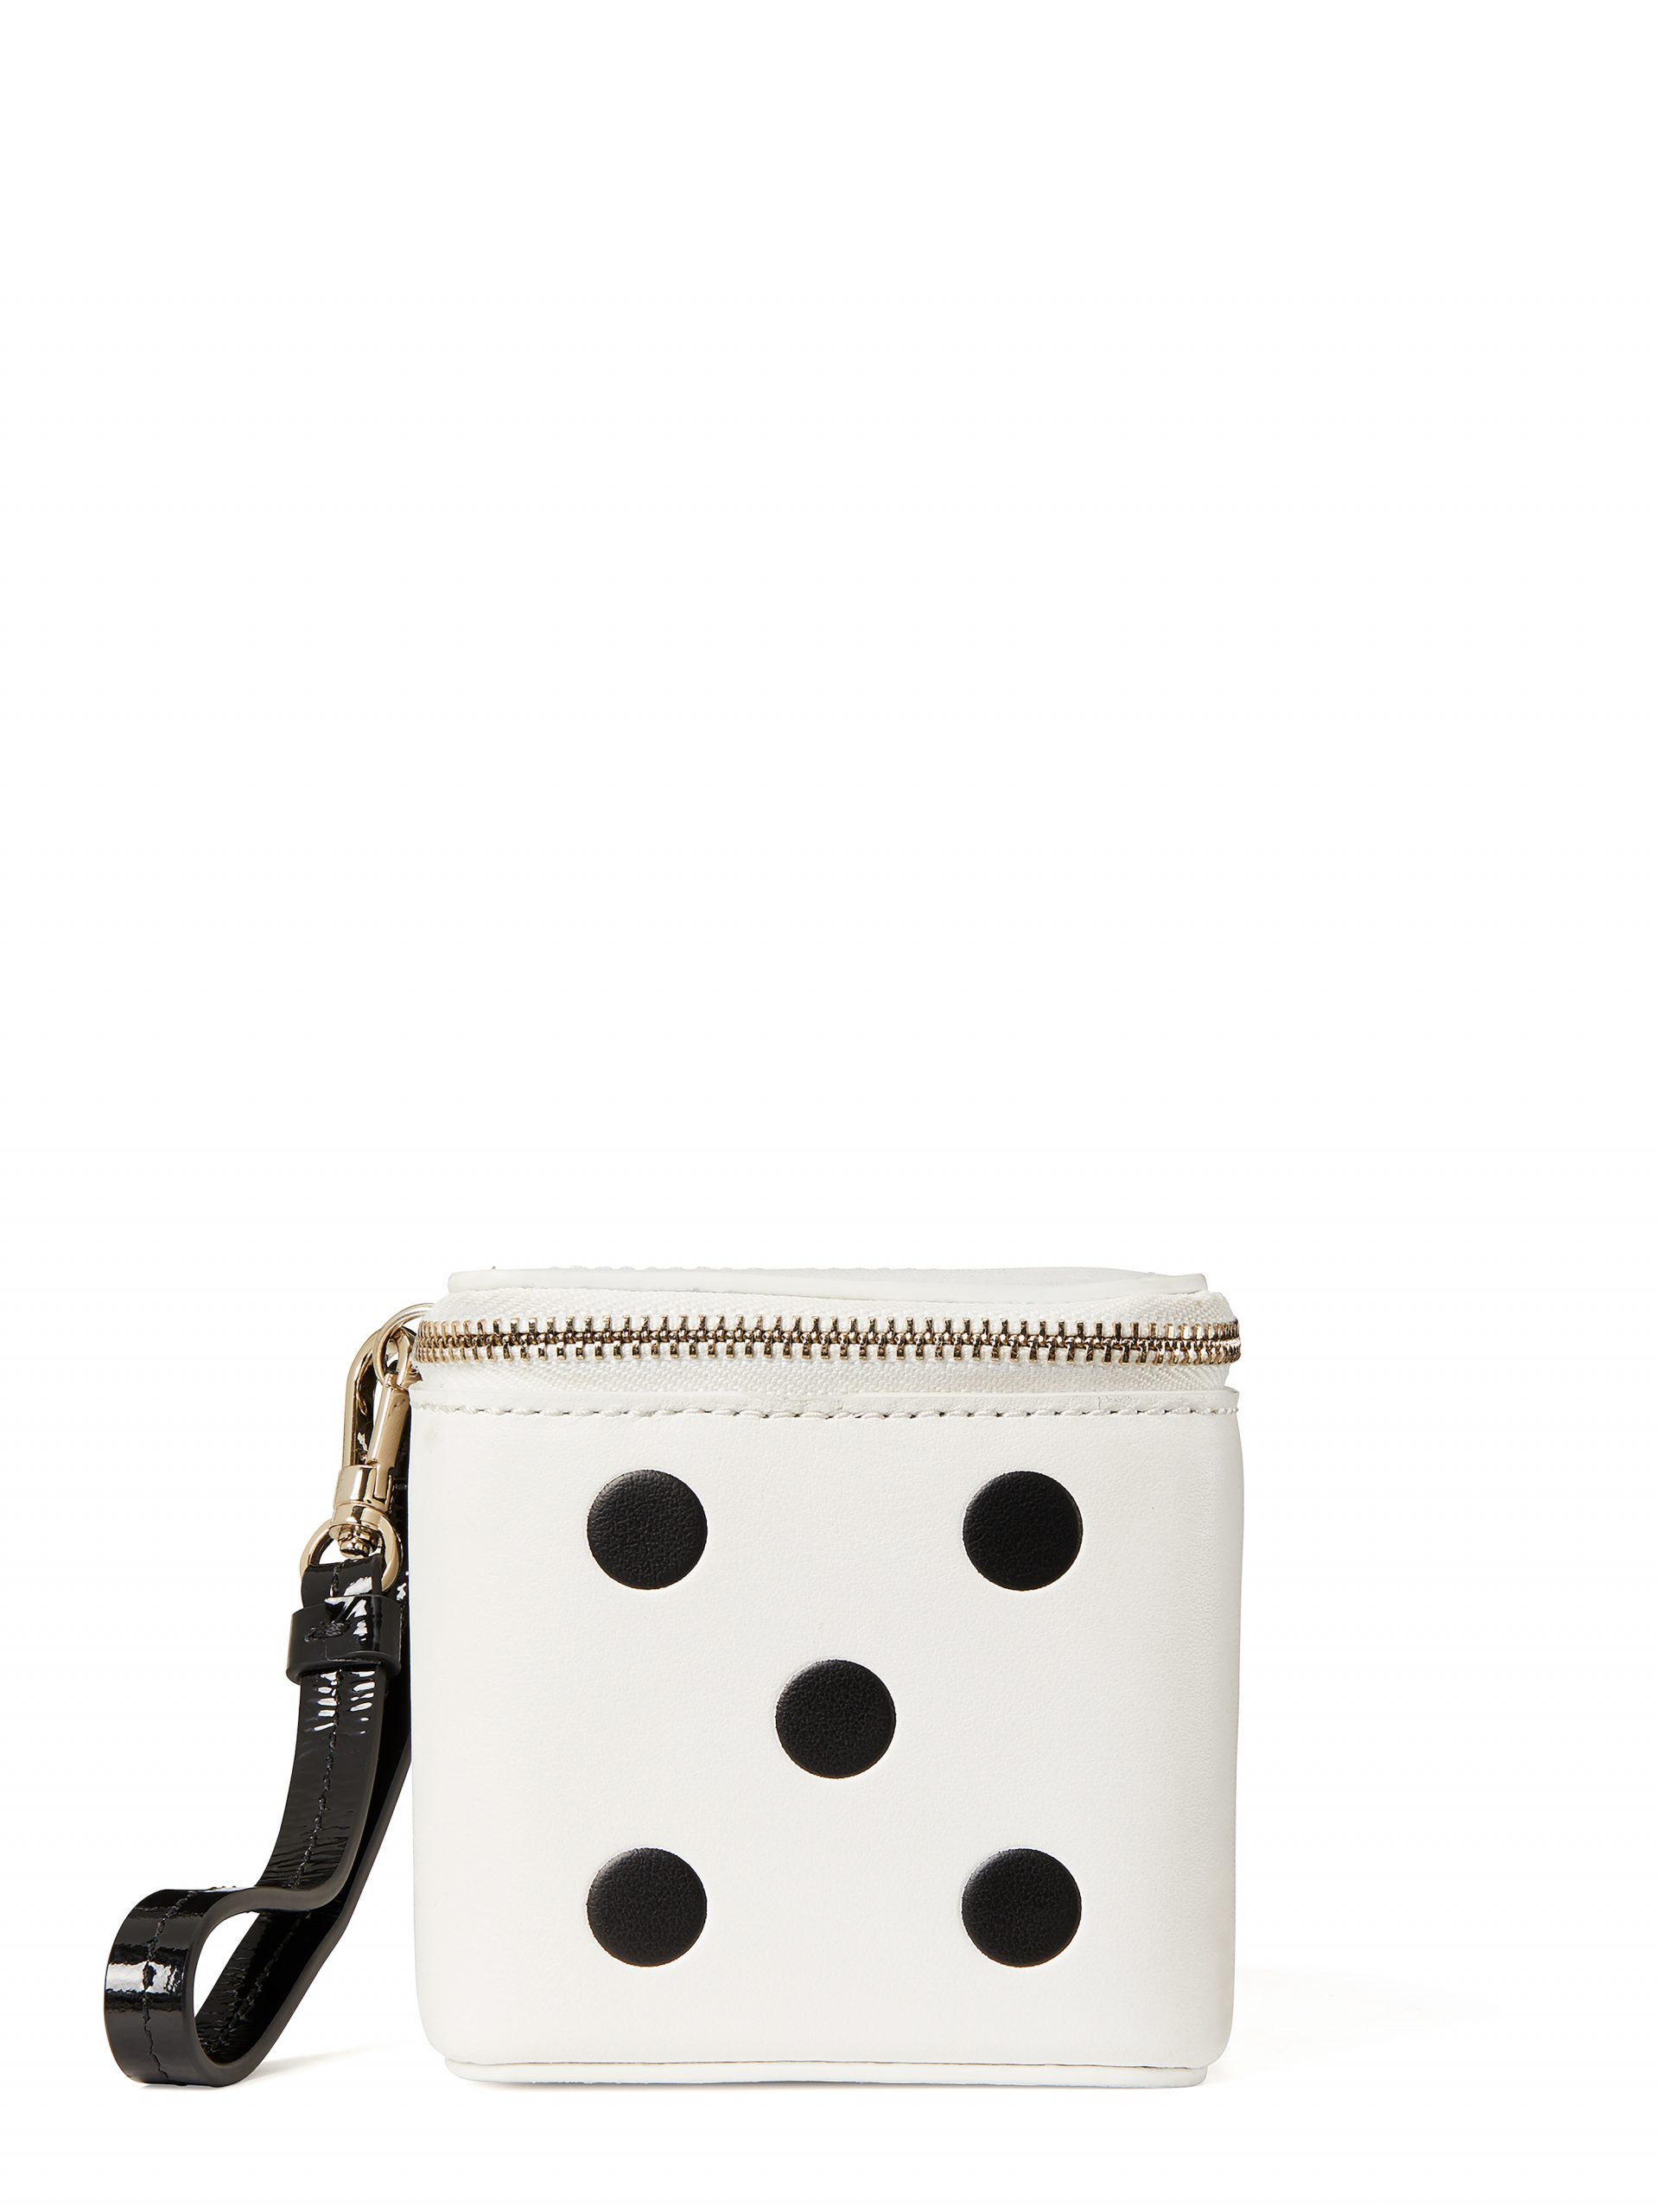 Kate Spade New York Holiday 2020: Whimsical Bags, Glitter Clutches, And